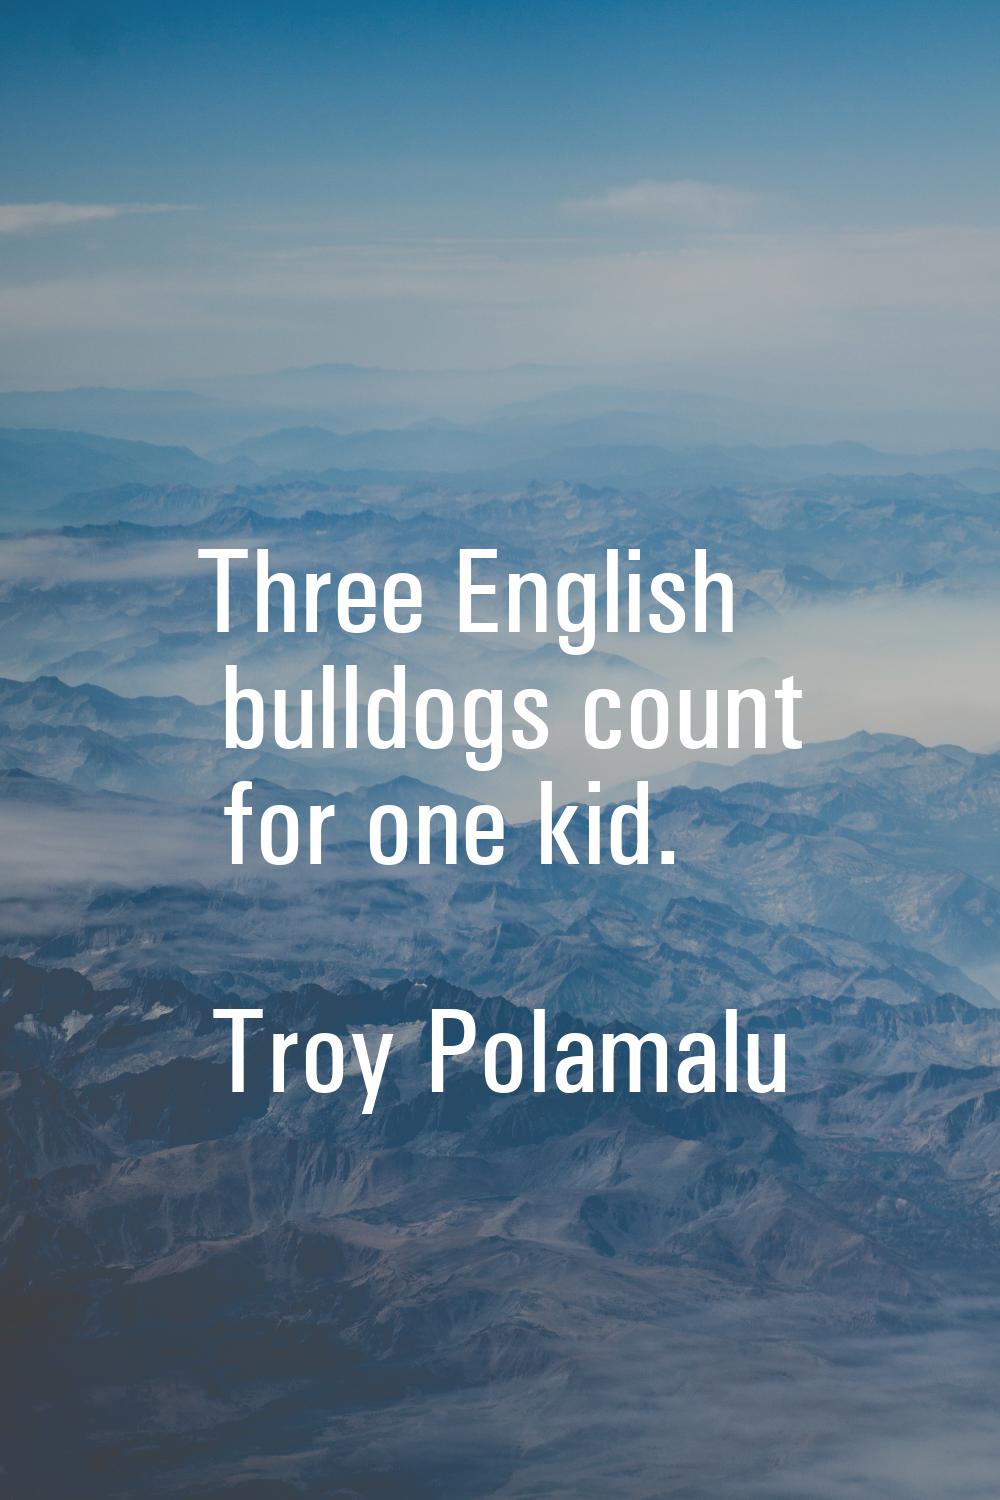 Three English bulldogs count for one kid.